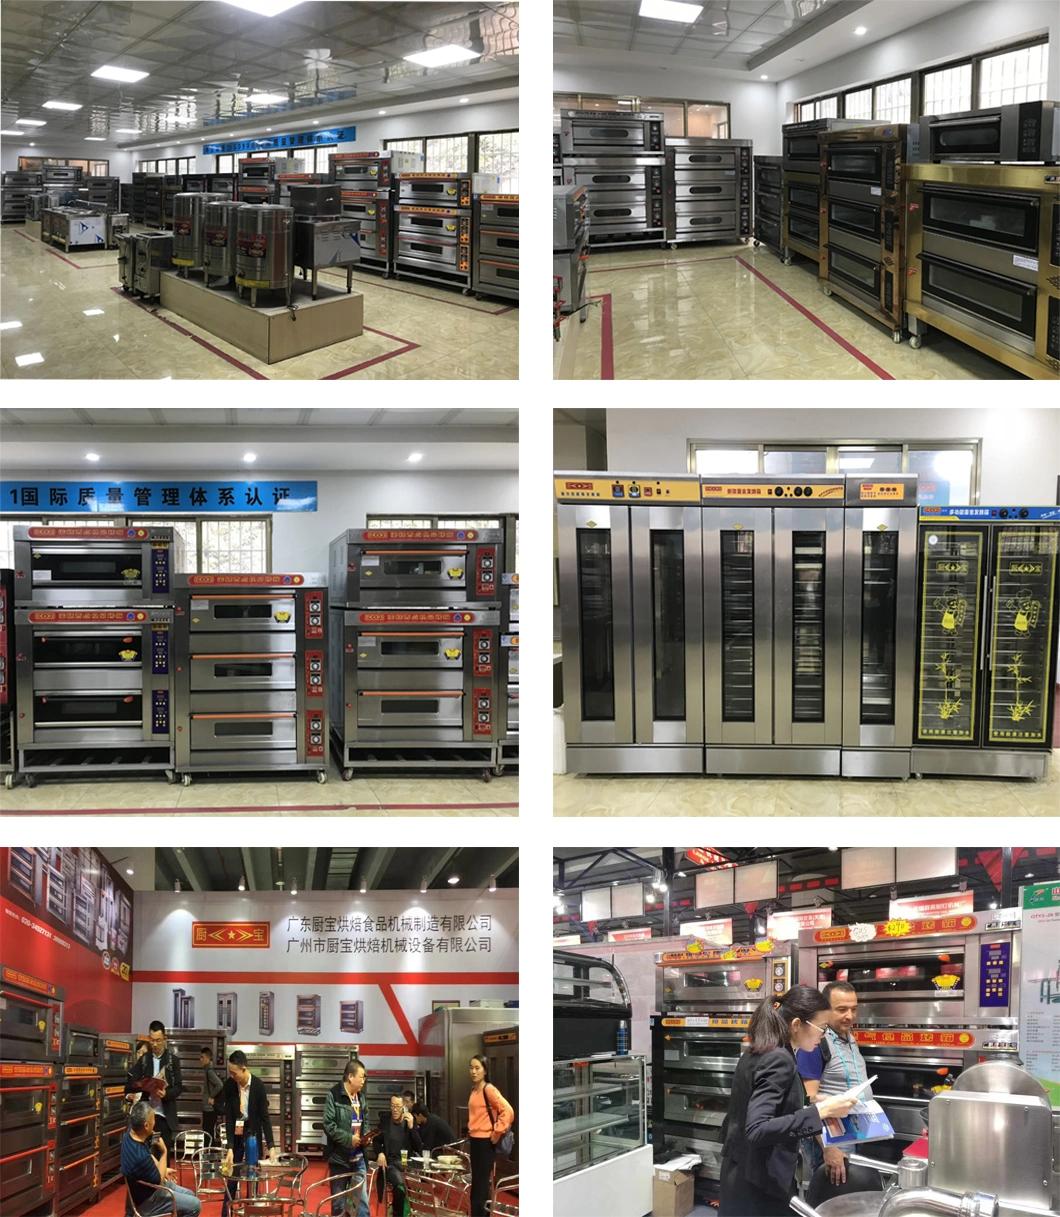 1 Deck 2 Tray Electric Oven for Commercial Kitchen Baking Equipment Food Machine Bakery Machinery